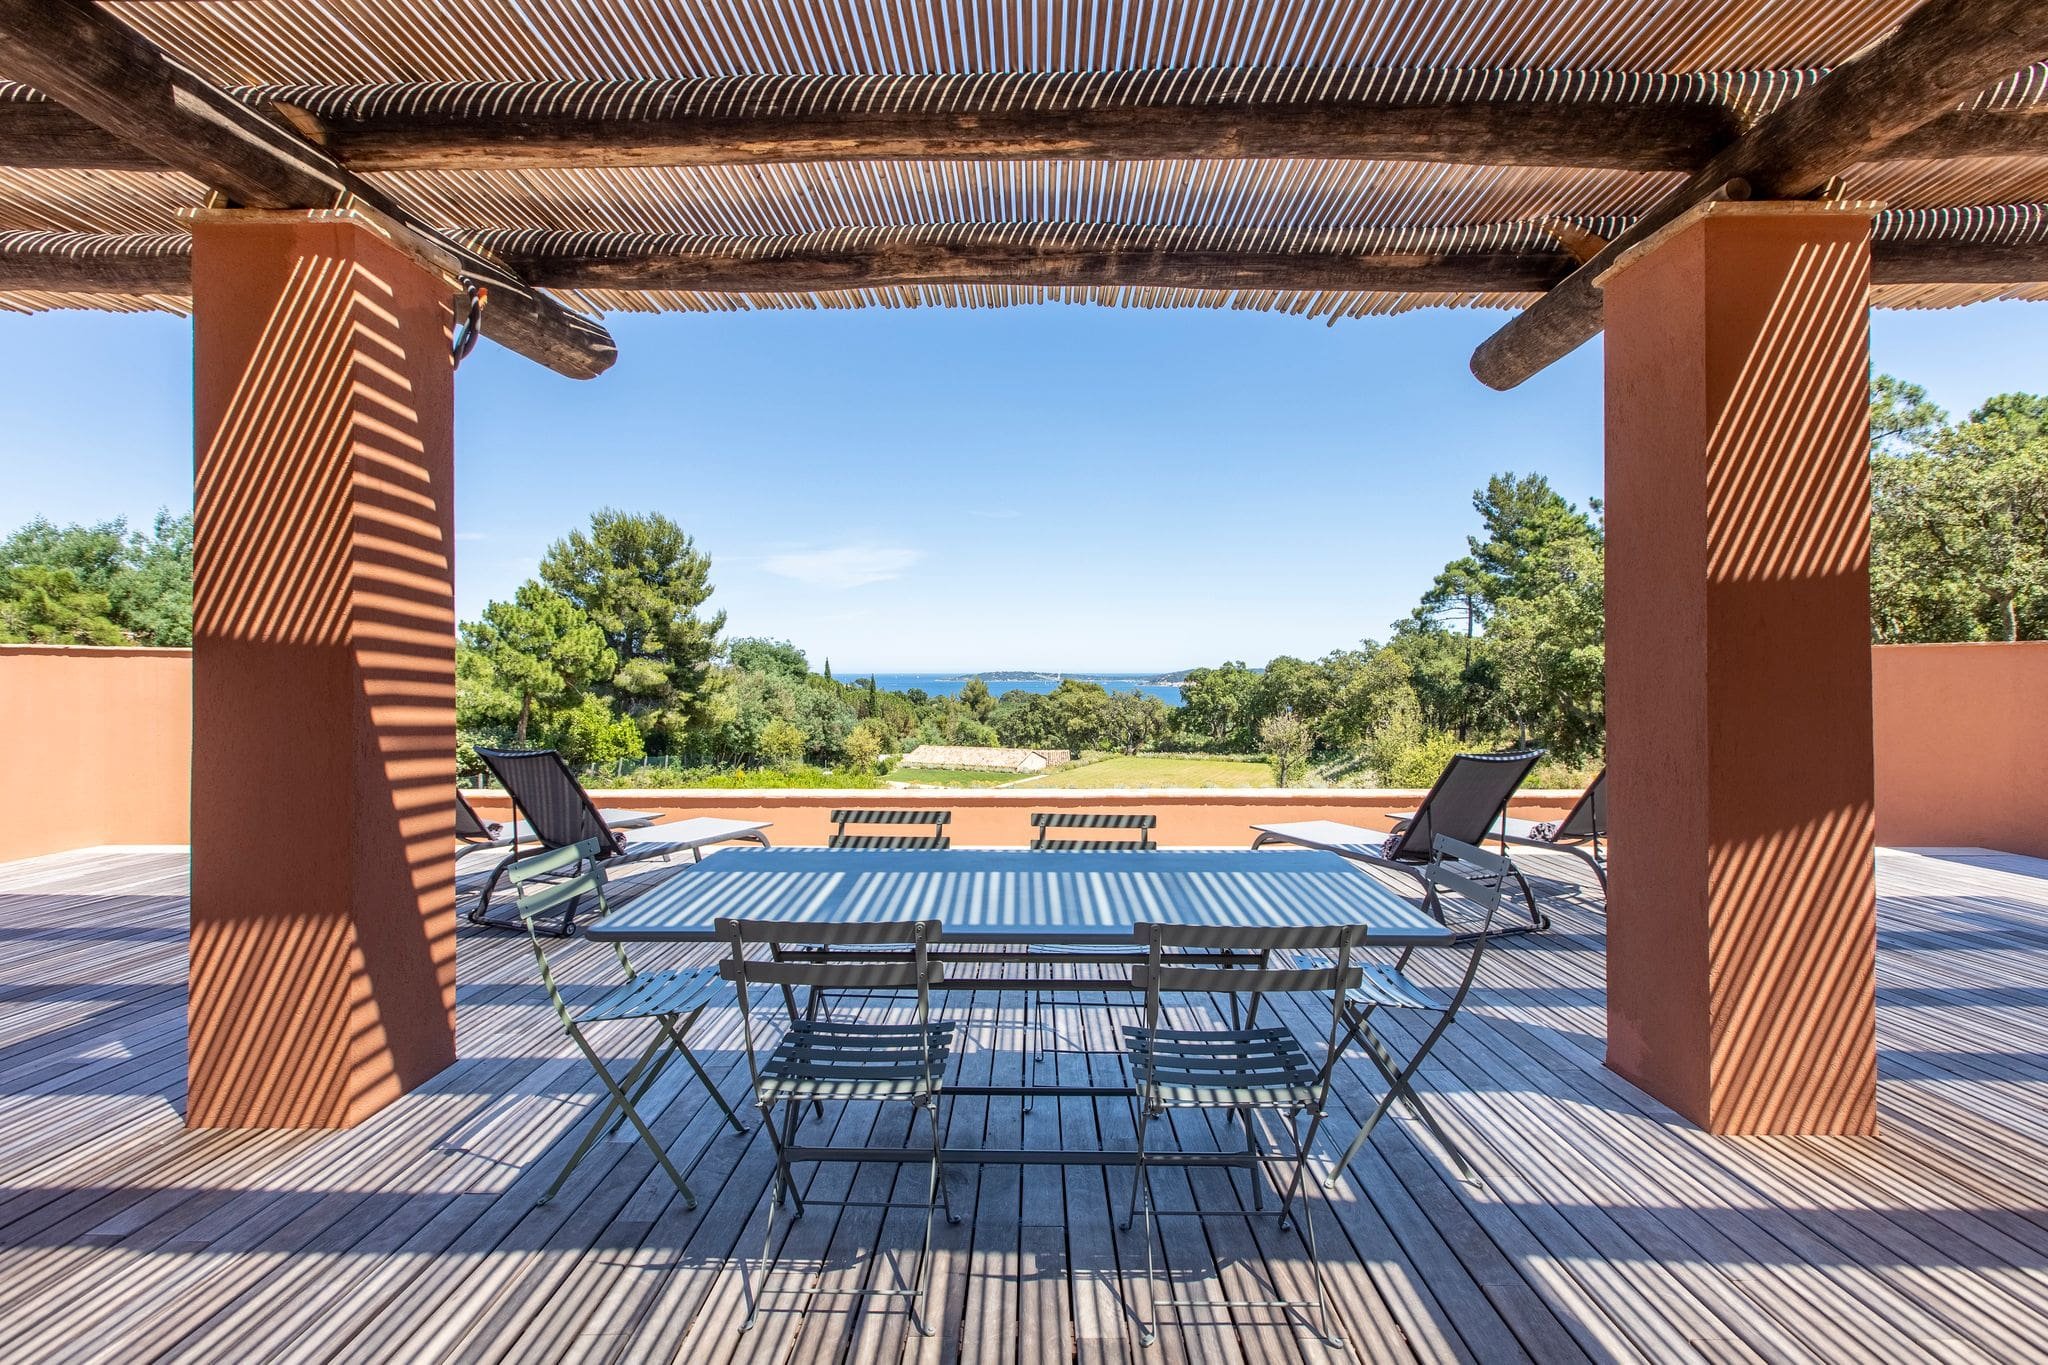 Luxury villa Golfe de St Tropez for rent with sea view and swimming pool